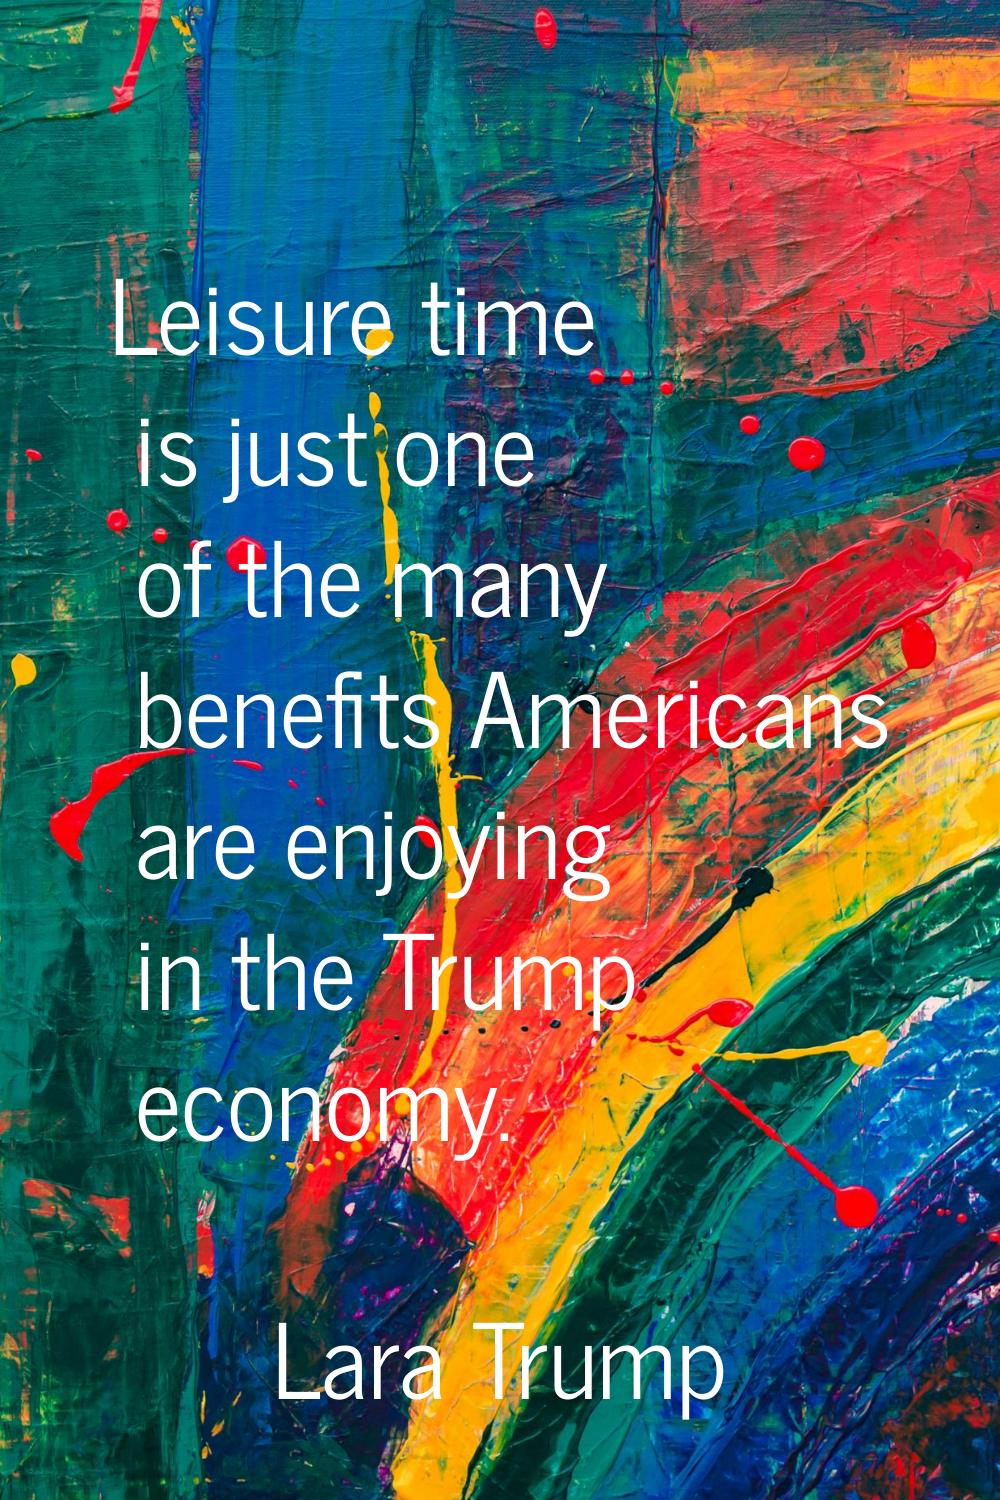 Leisure time is just one of the many benefits Americans are enjoying in the Trump economy.